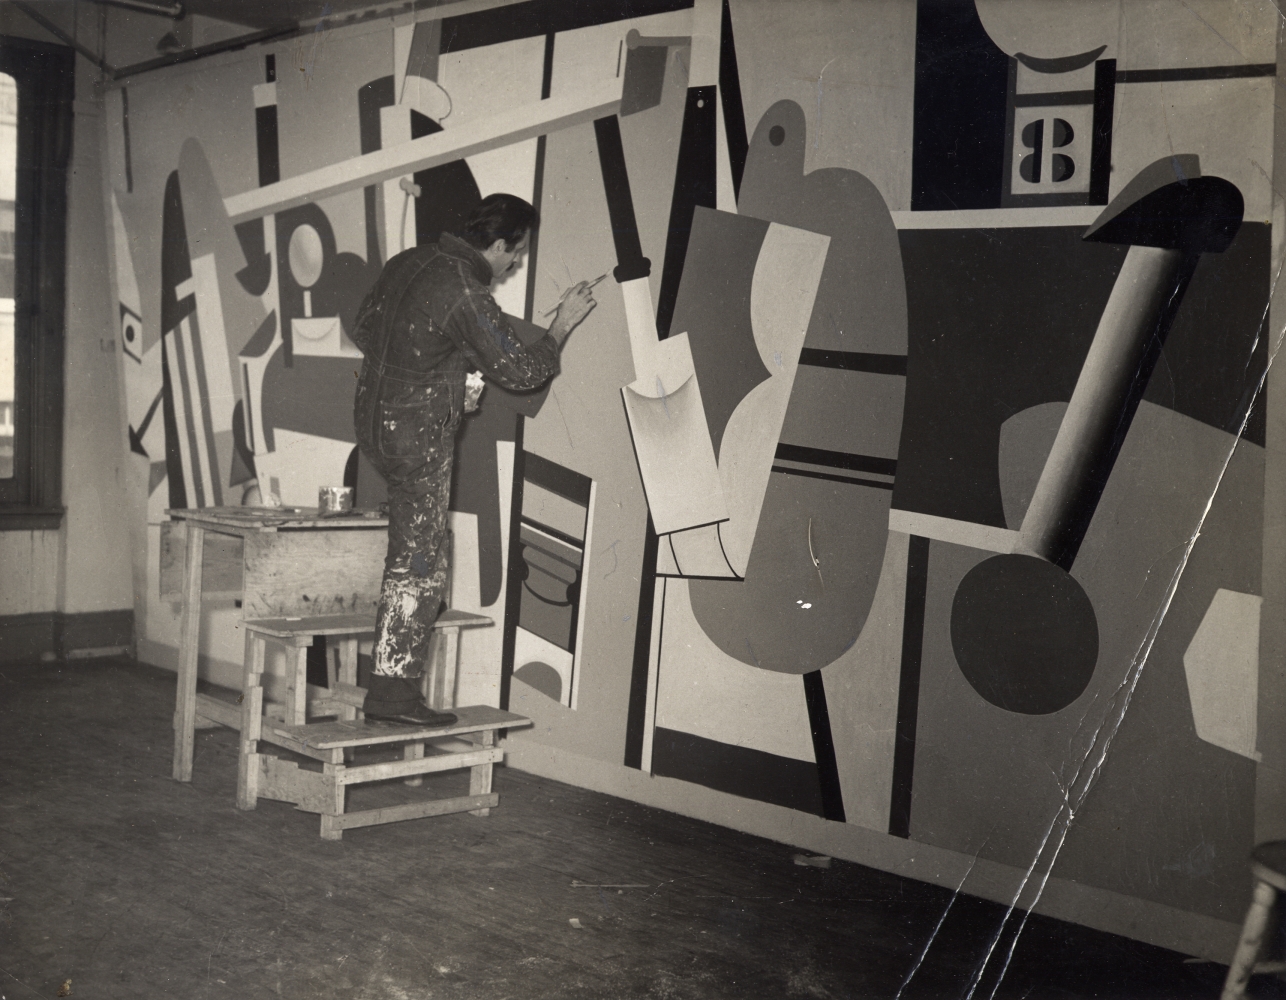 Gorky at work on Activities on the Field, his mural project for the Newark Airport, 1936. New York Federal Art Project. Photograph by Eisman.